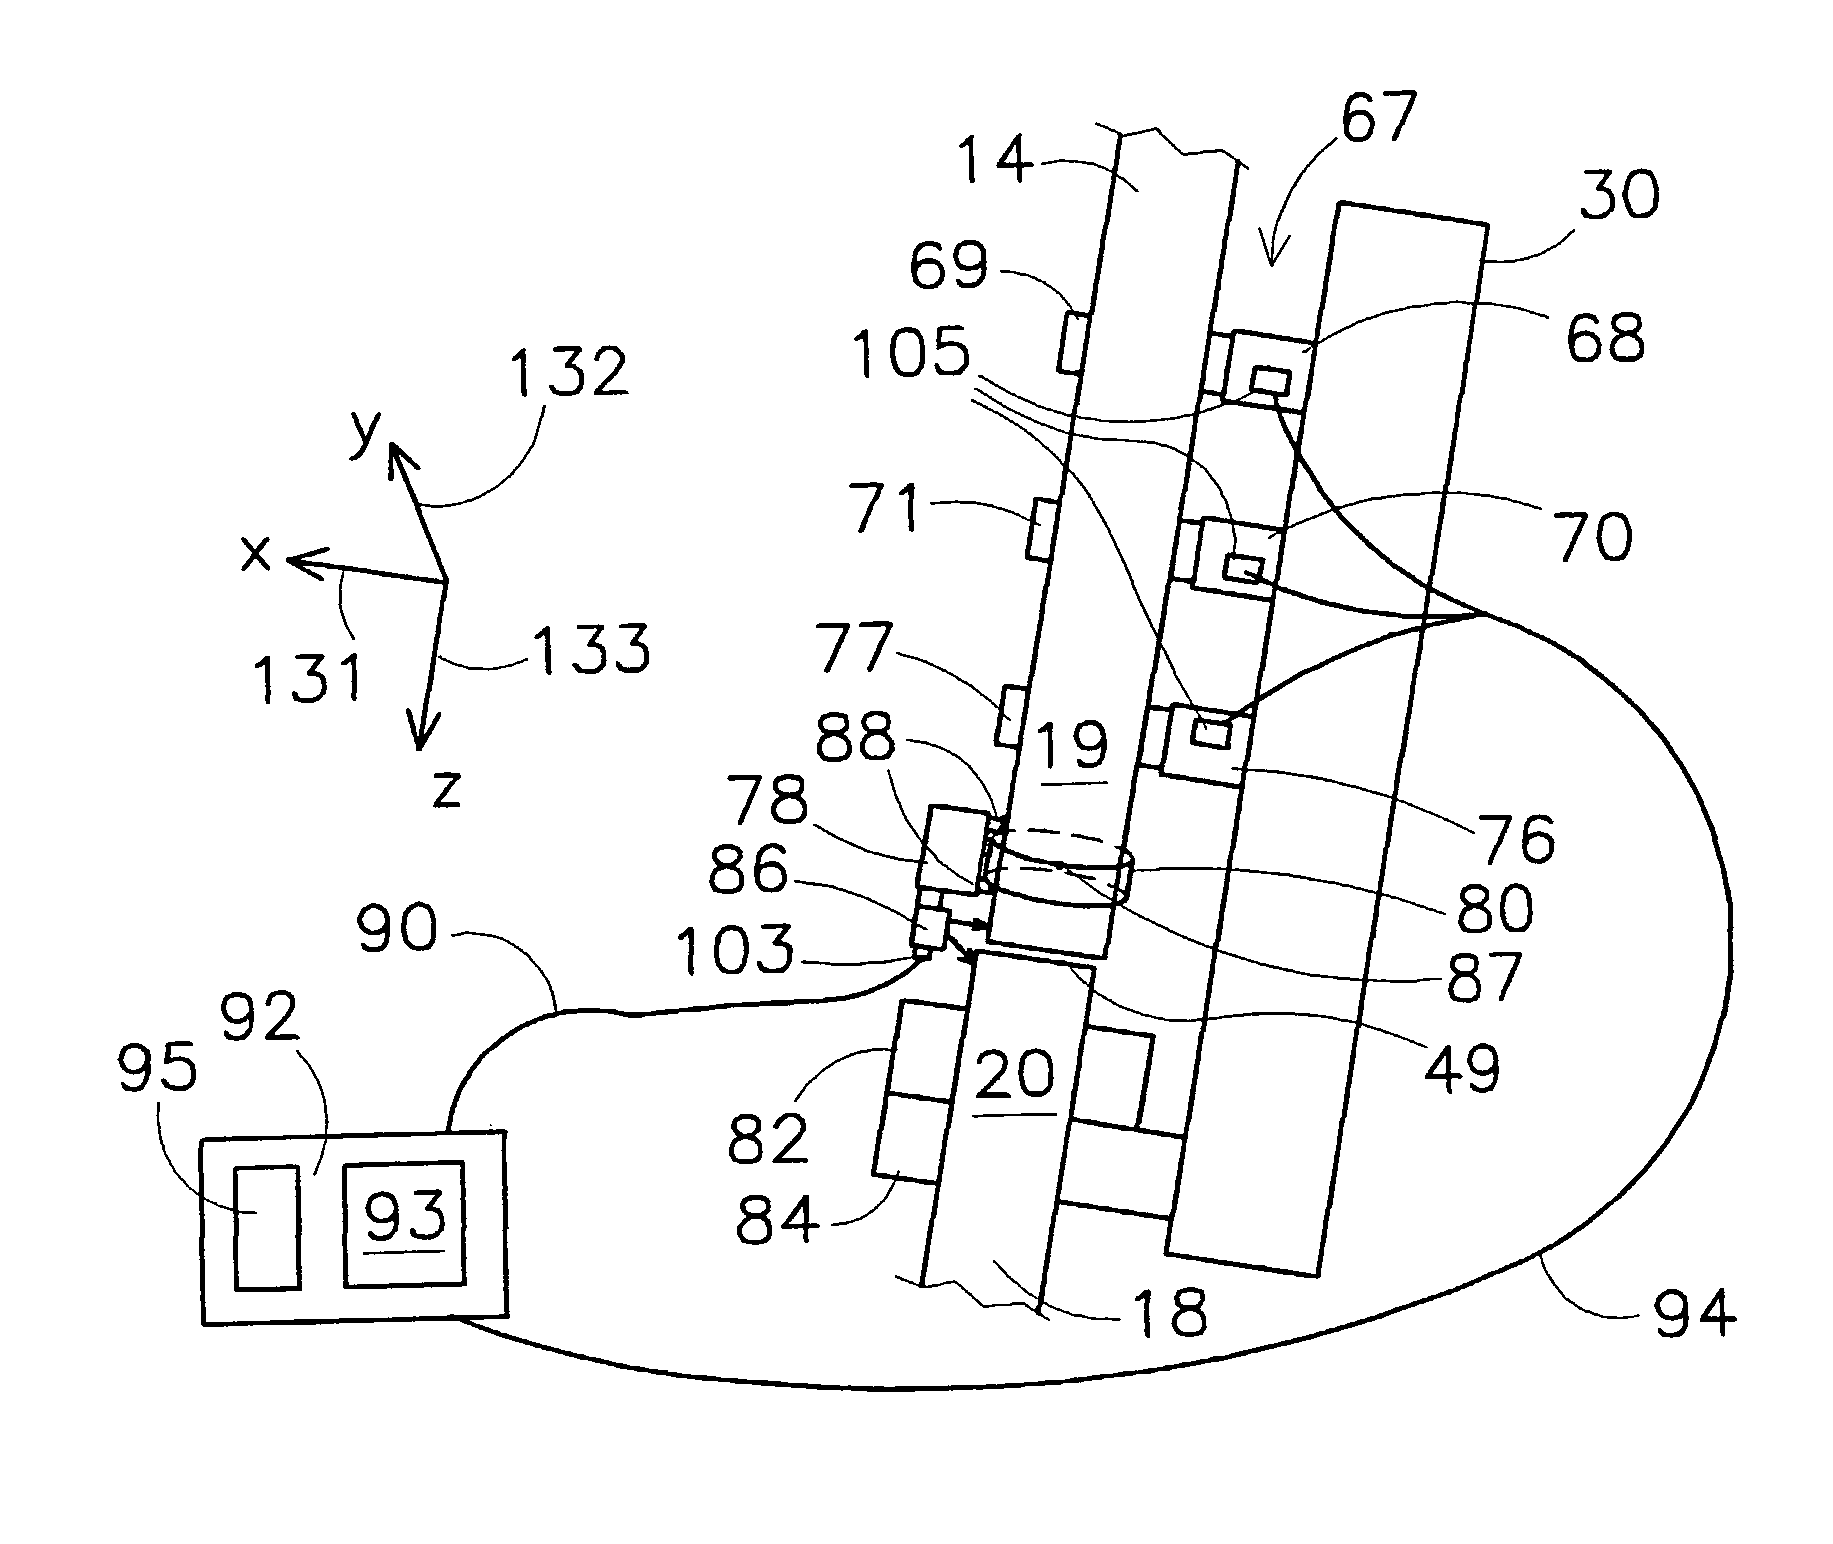 Method and device for positioning ends of pipe sections relative to one another